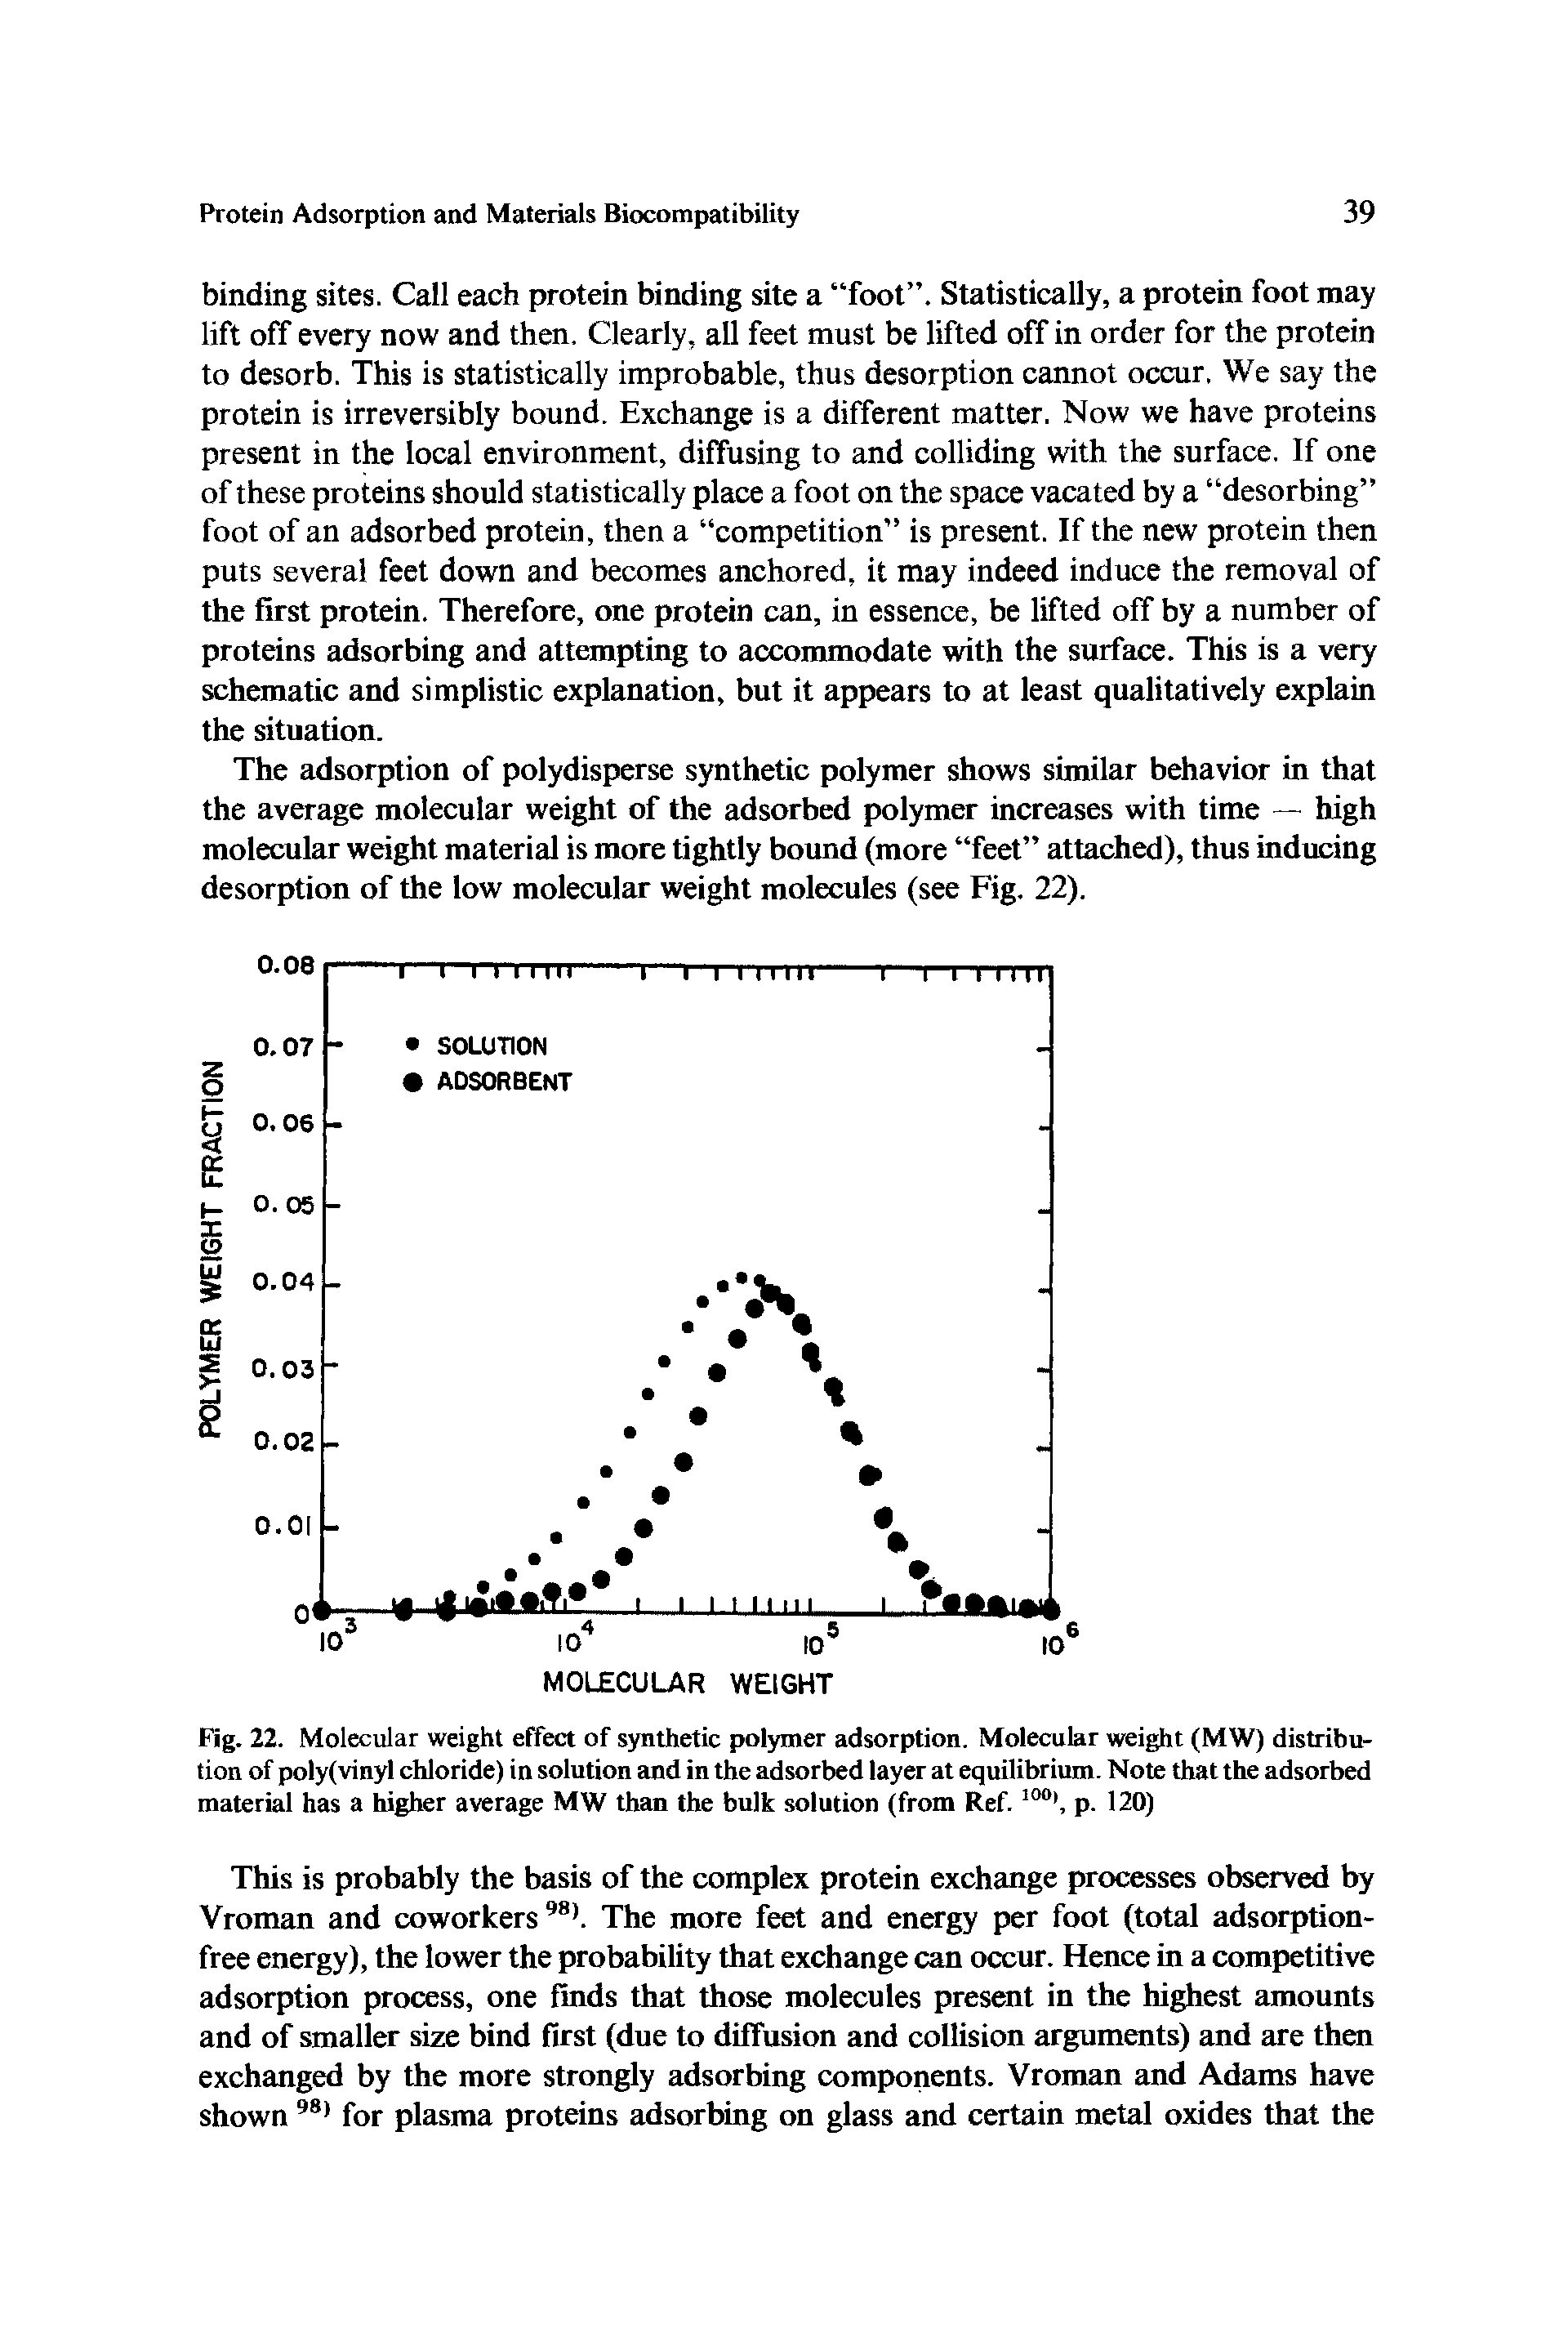 Fig. 22. Molecular weight effect of synthetic polymer adsorption. Molecular weight (MW) distribution of poly(vinyl chloride) in solution and in the adsorbed layer at equilibrium. Note that the adsorbed material has a higher average MW than the bulk solution (from Ref.1001, p. 120)...